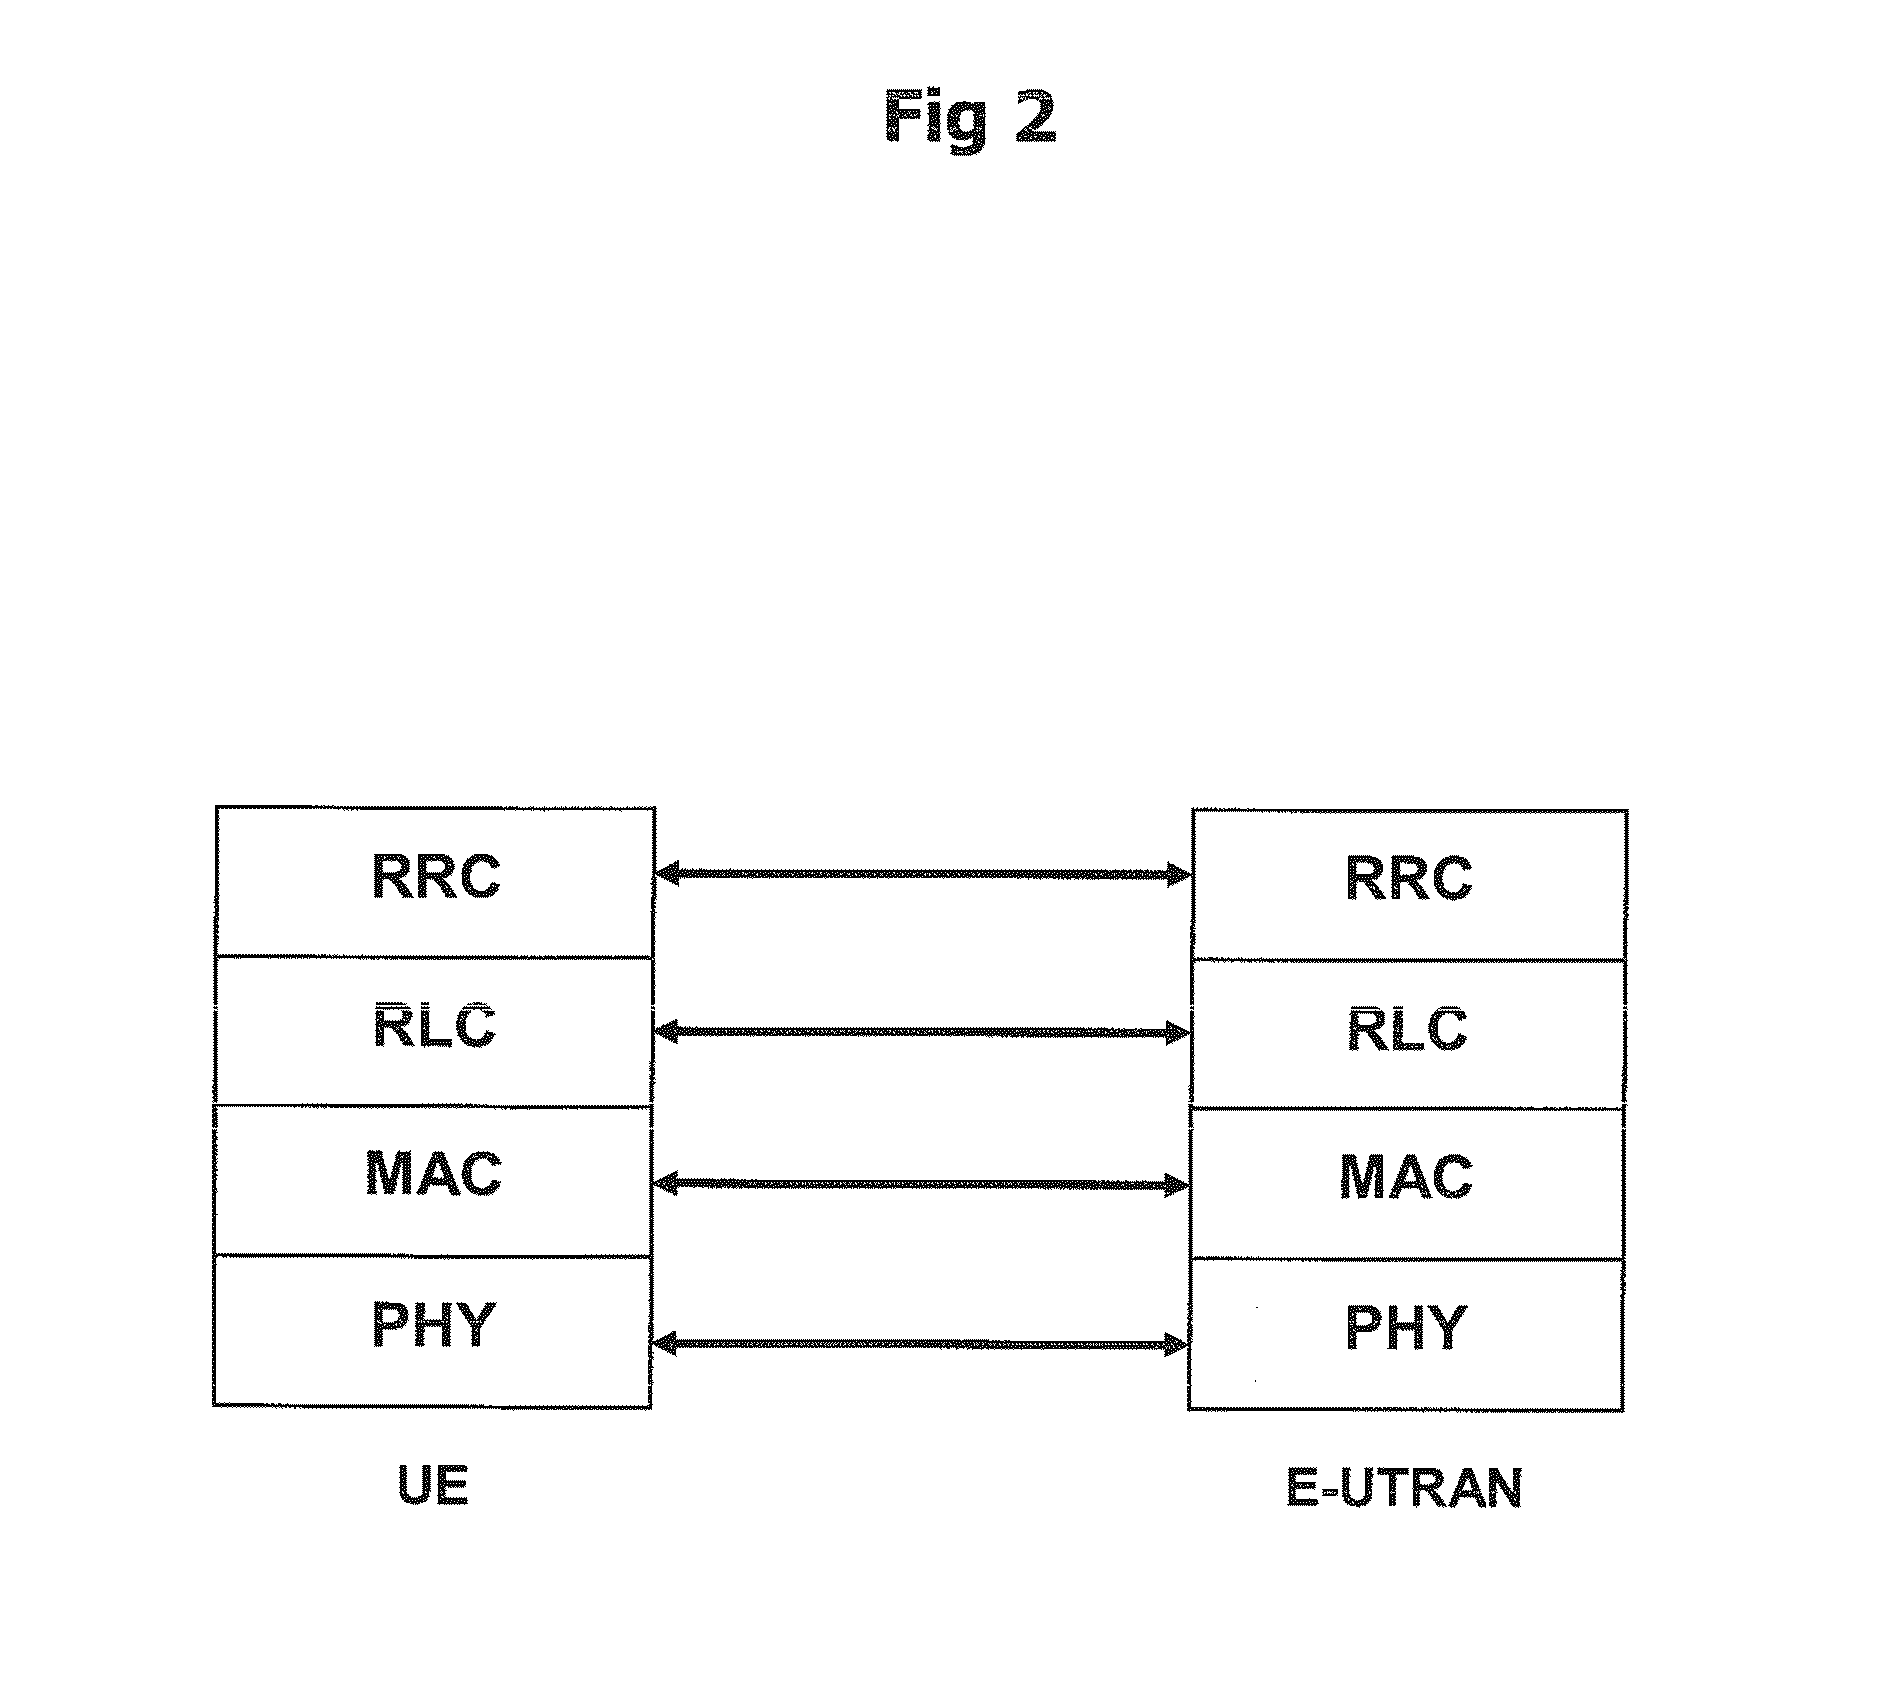 Radio resource group selection method for a radio resource management